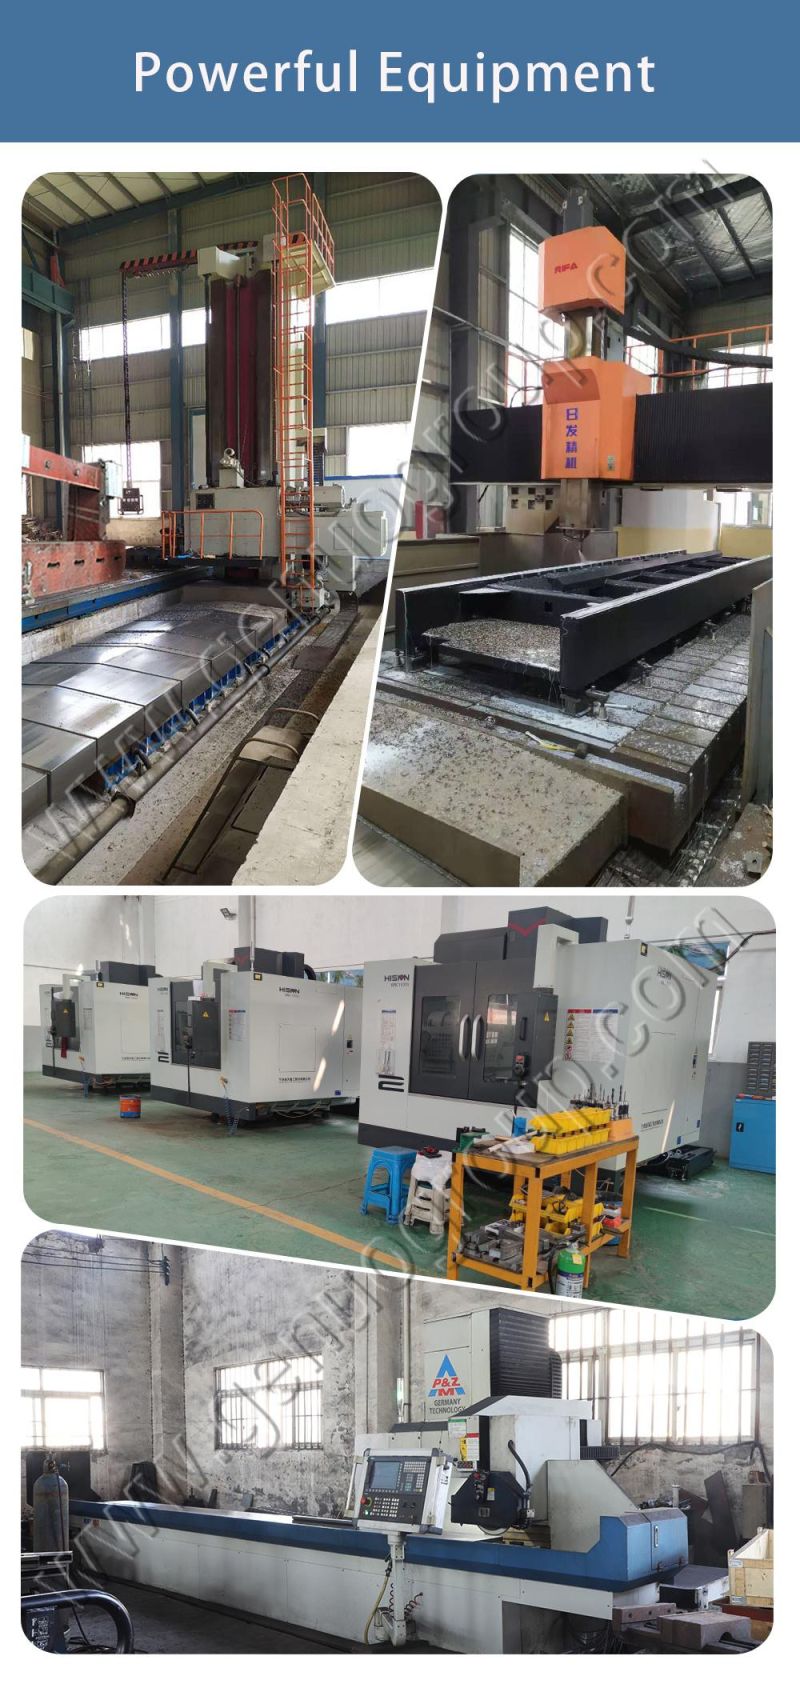 Gn 6015 LC 4000W Single Table Laser Cutting Machine